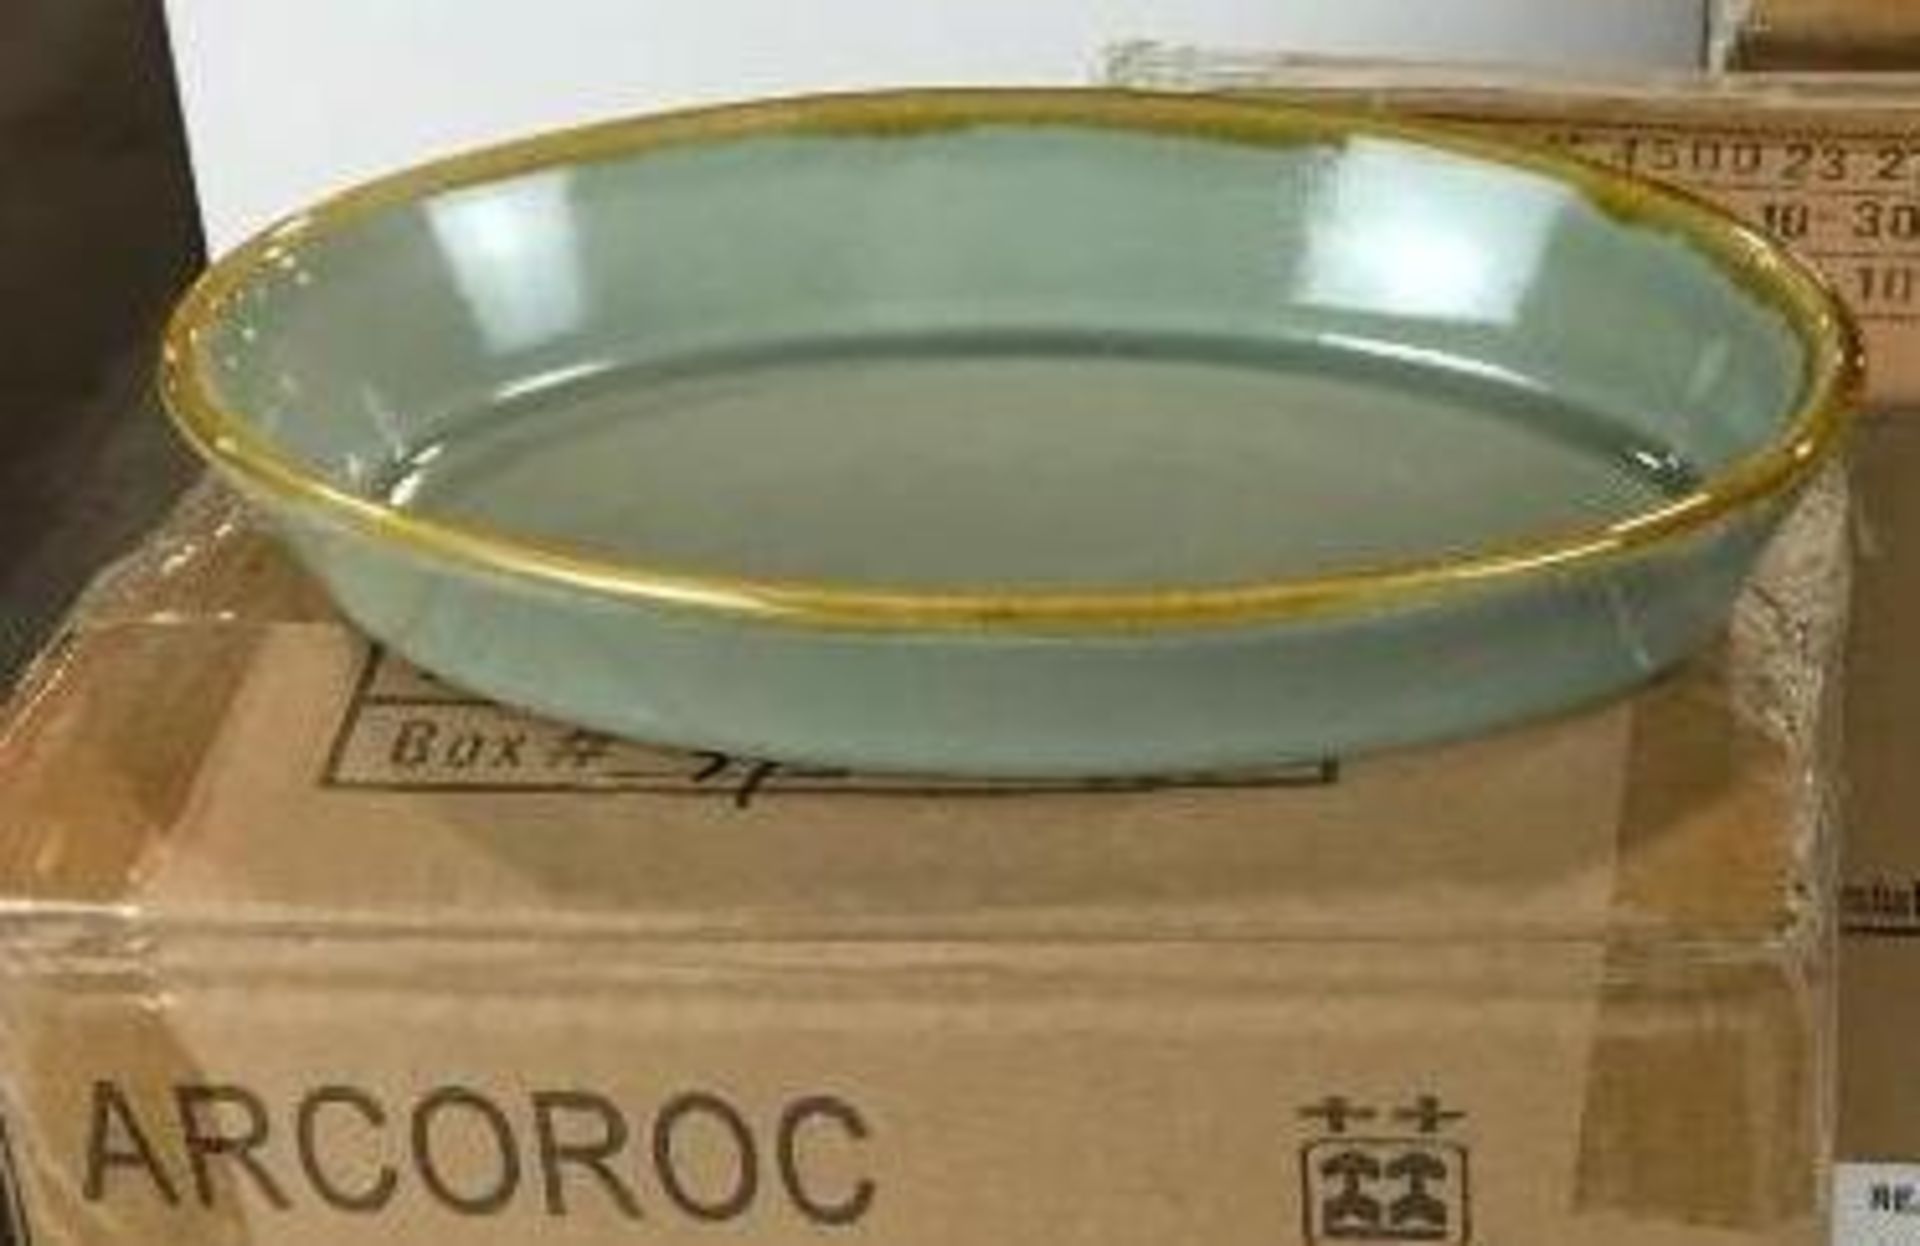 3 CASES OF TERRASTONE 8 1/4" SAGE GREEN OVAL BAKER - 12/CASE, ARCOROC - NEW - Image 2 of 2